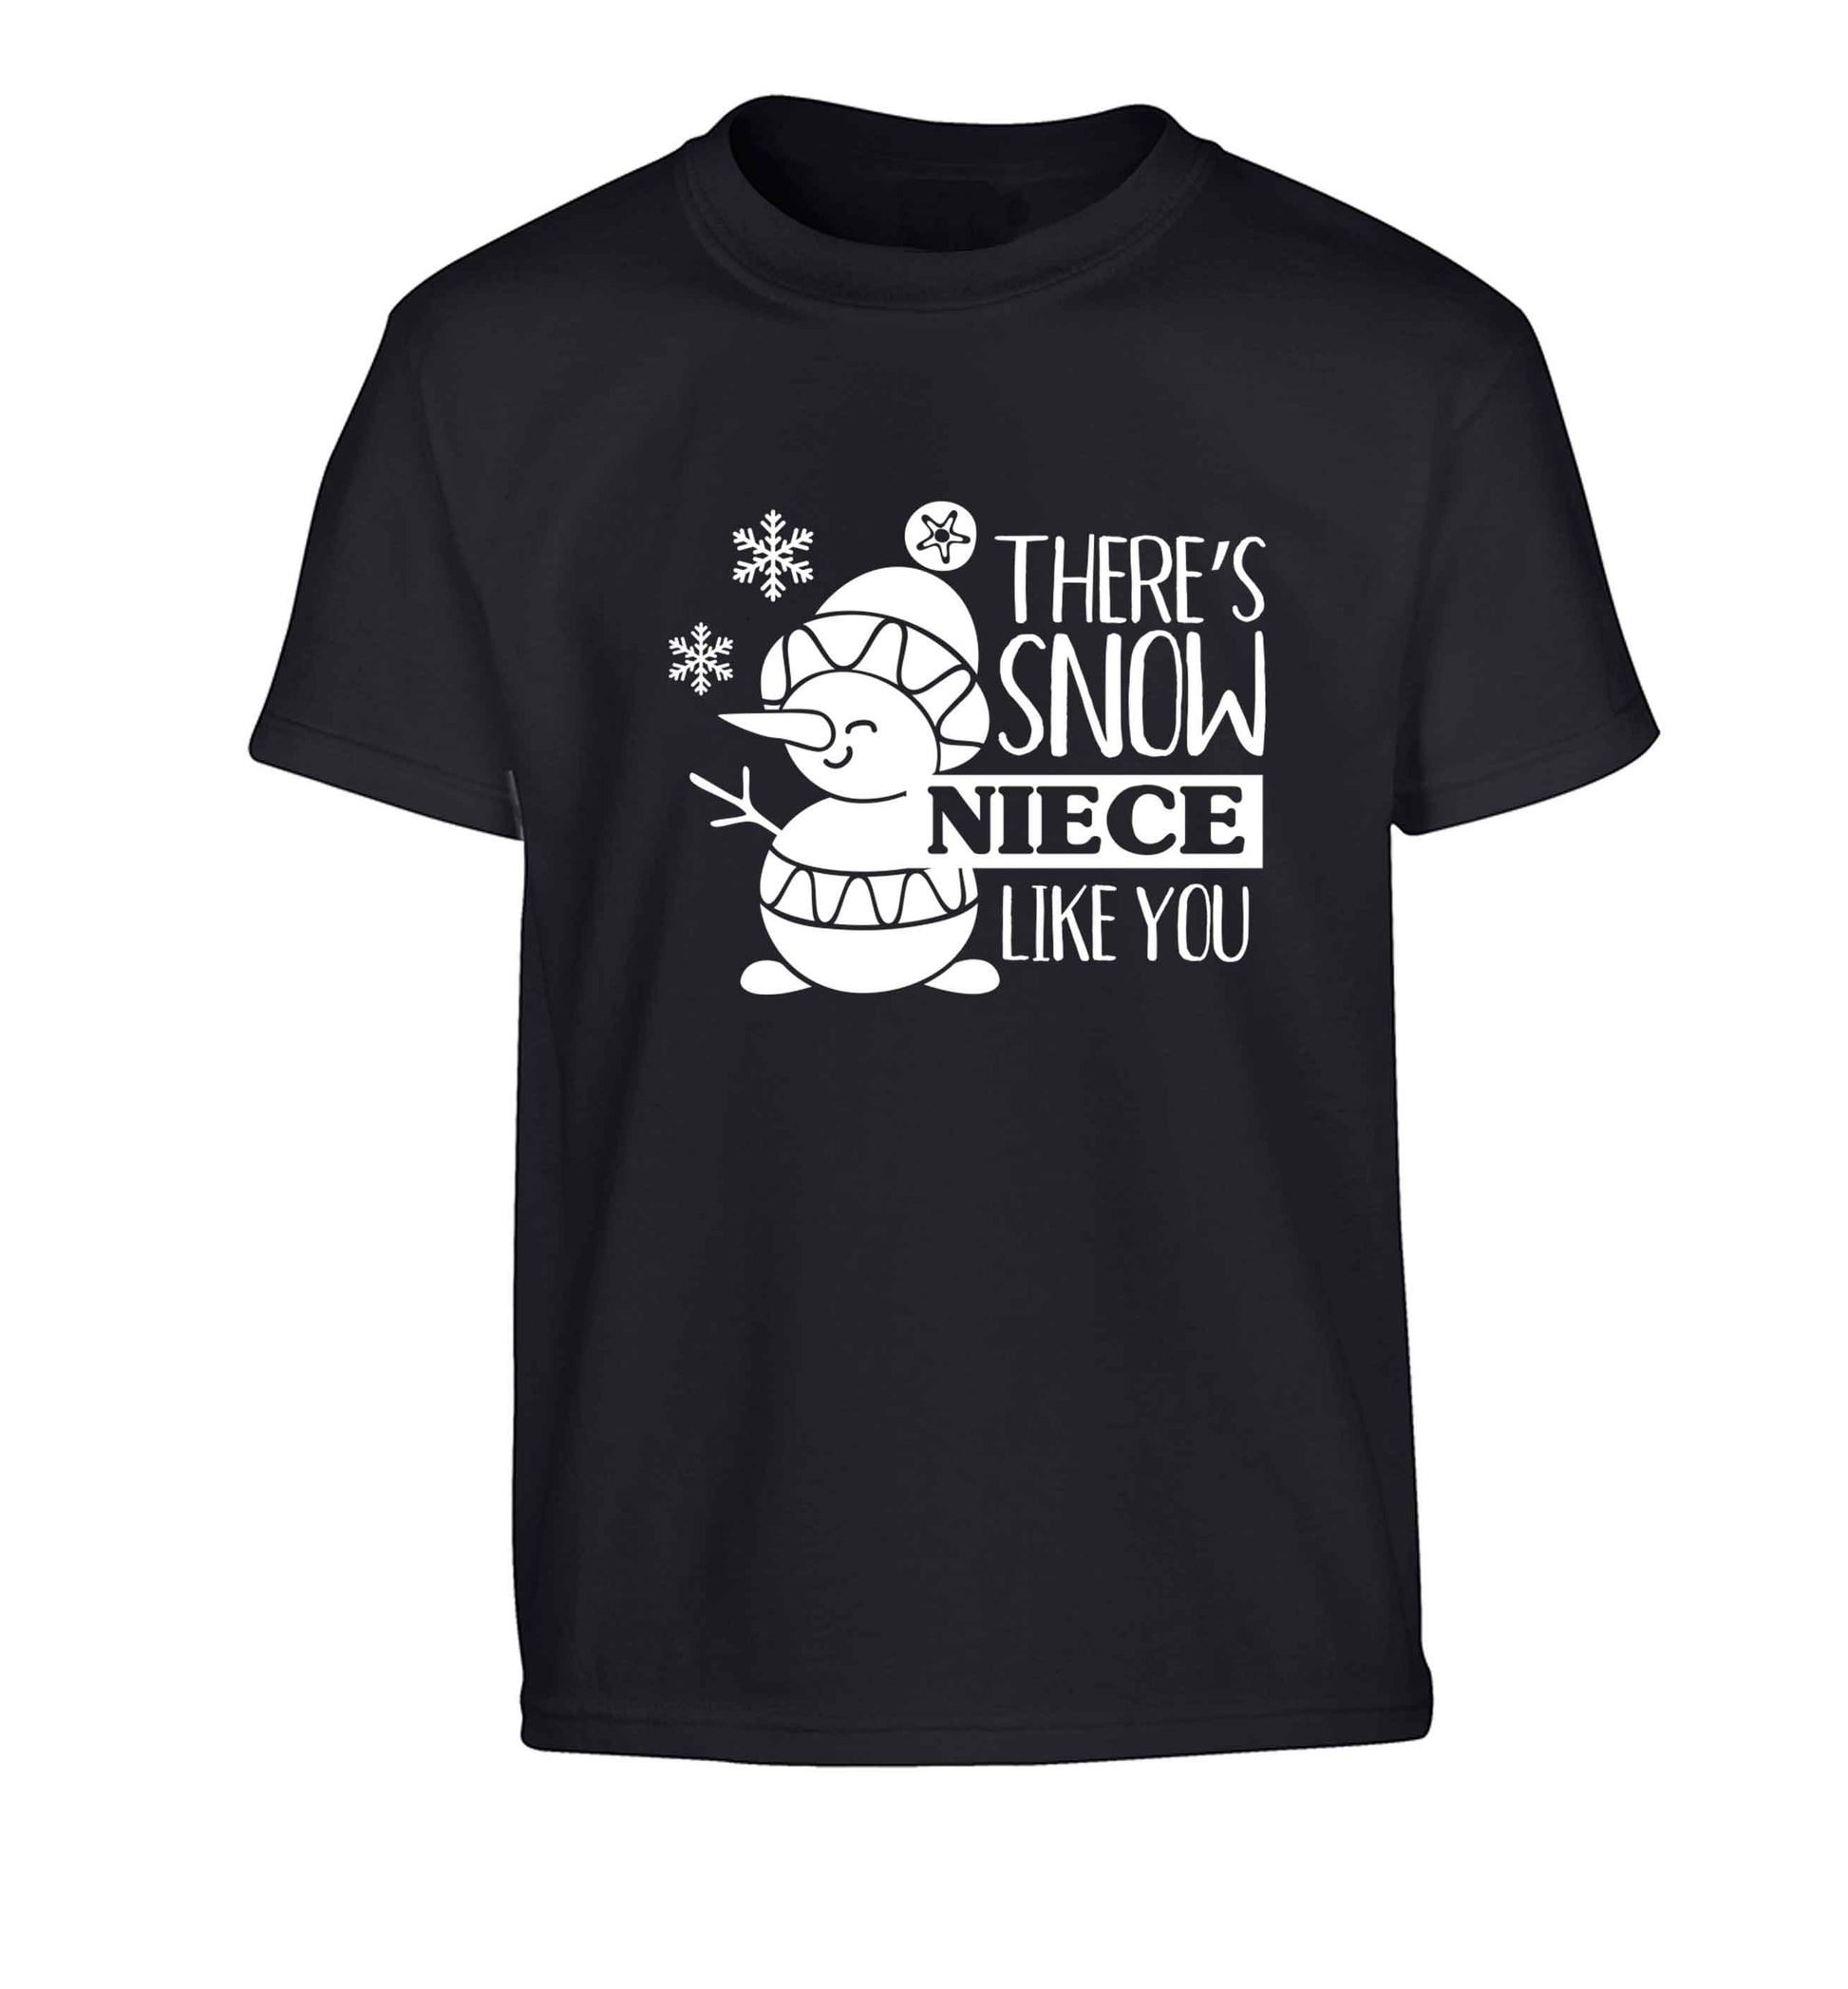 There's snow niece like you Children's black Tshirt 12-13 Years